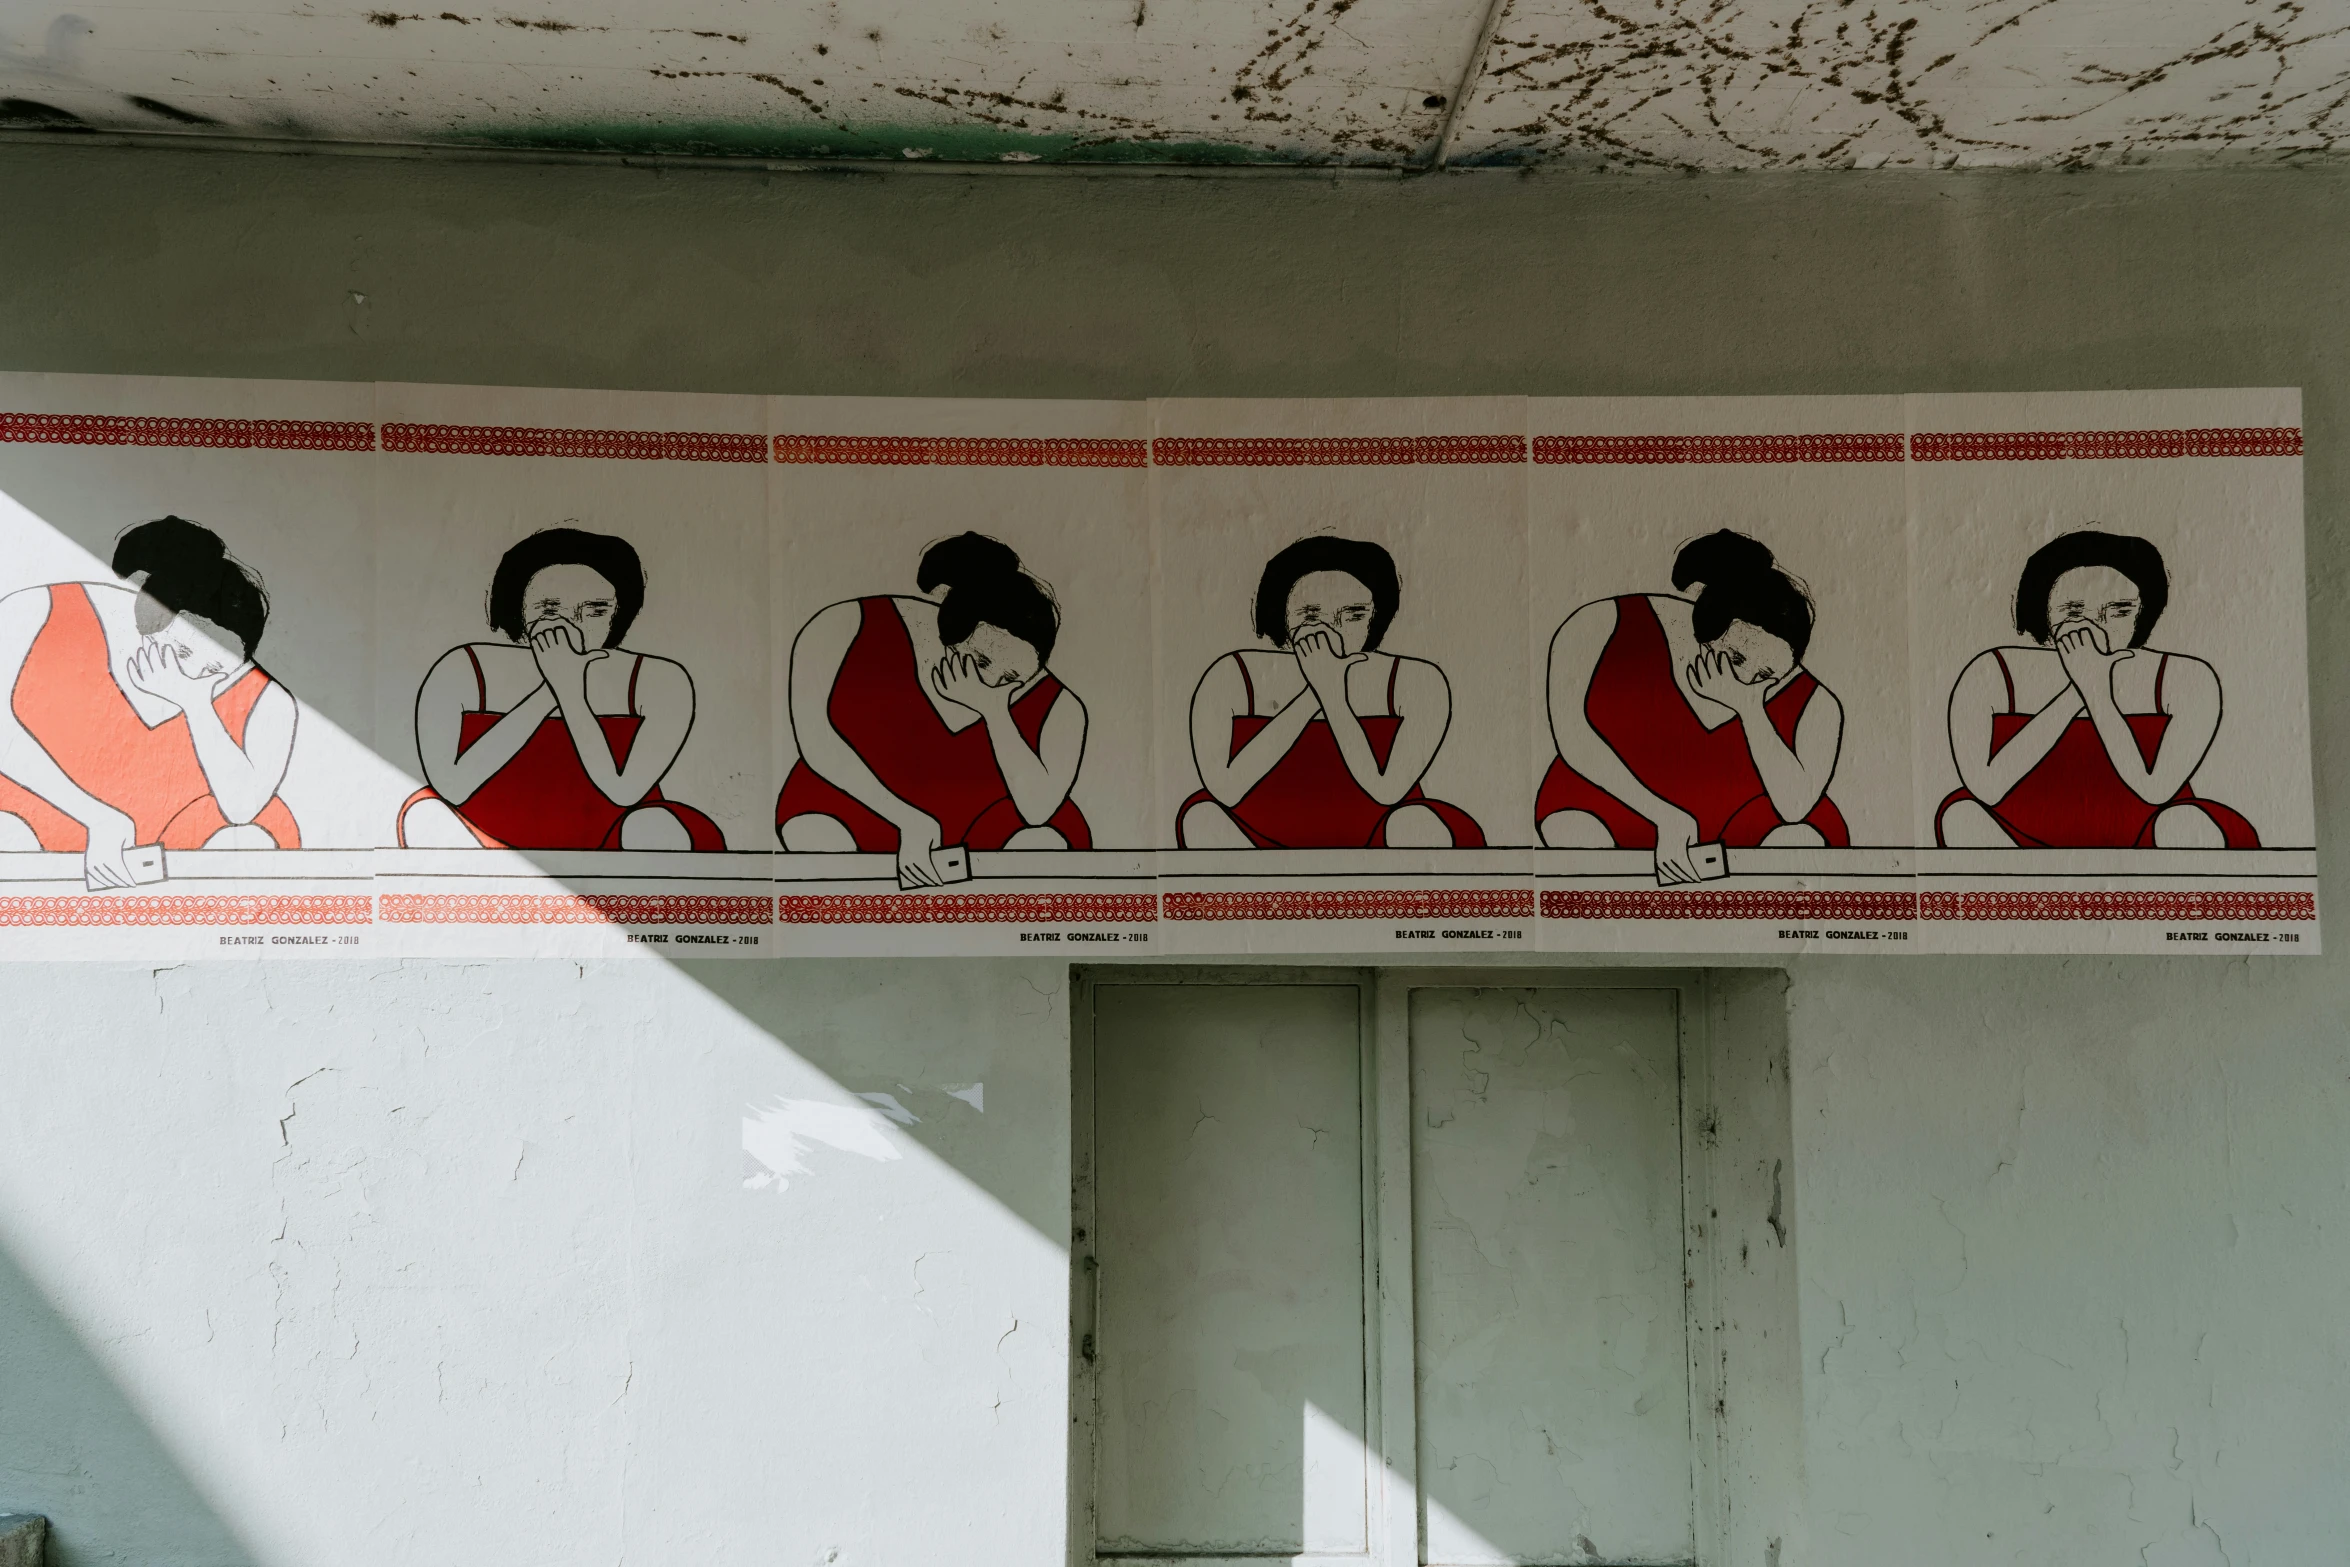 a street sign in thailand indicating there is a line of women in red skirts